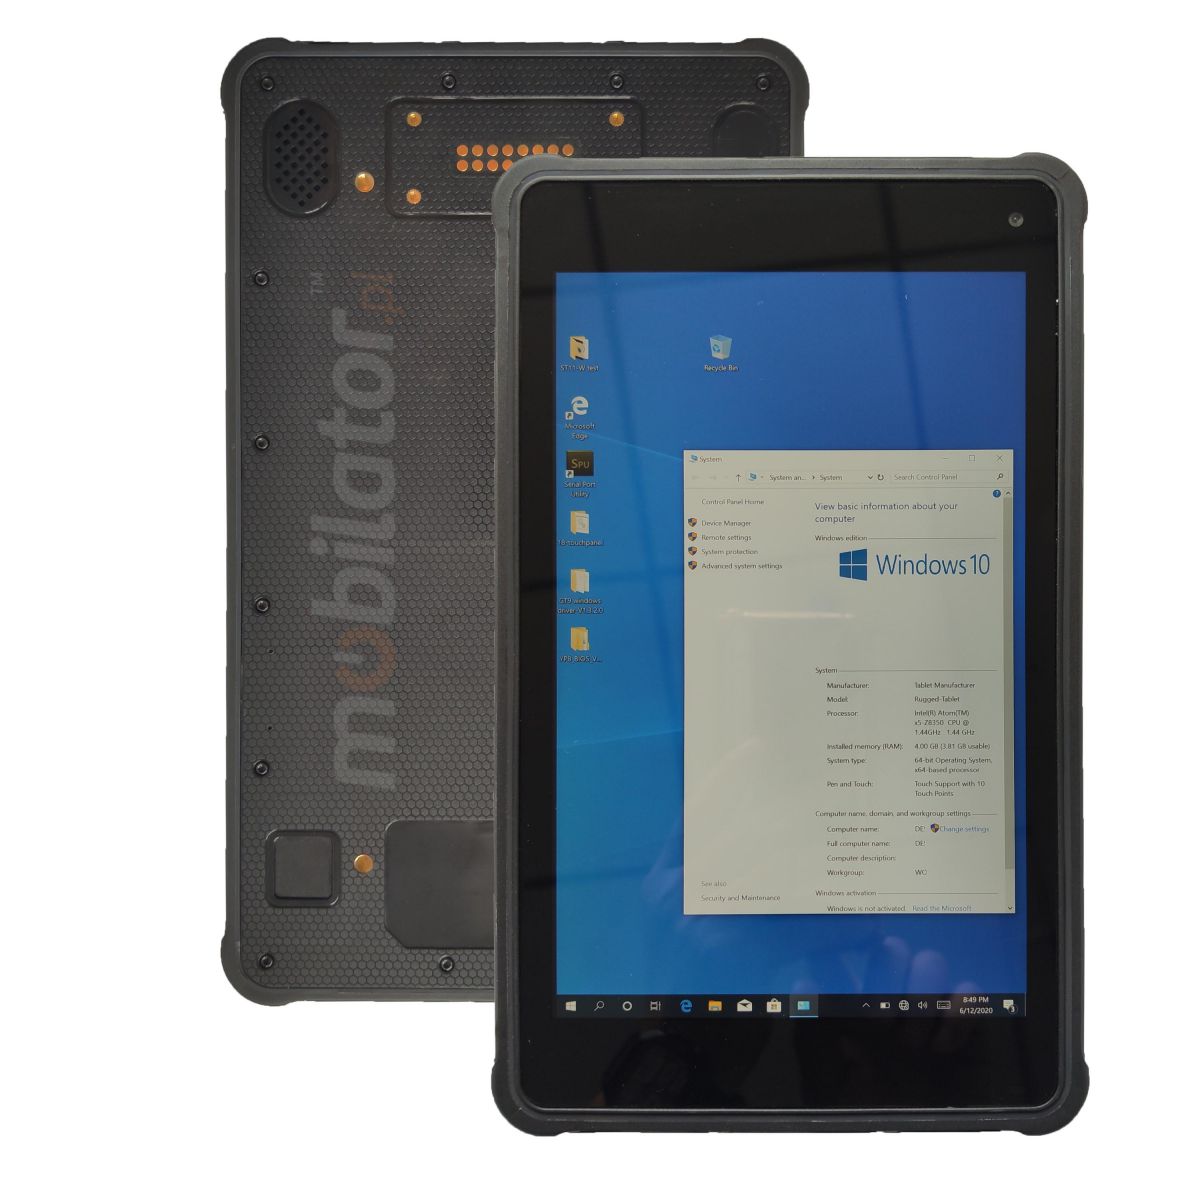 Rugged tablet with UHF RFID reader, front NFC, 4G and Bluetooth 4.0, 4GB RAM, 64GB disk and MIL-STD-810G standard - MobiPad ST800B v.10 